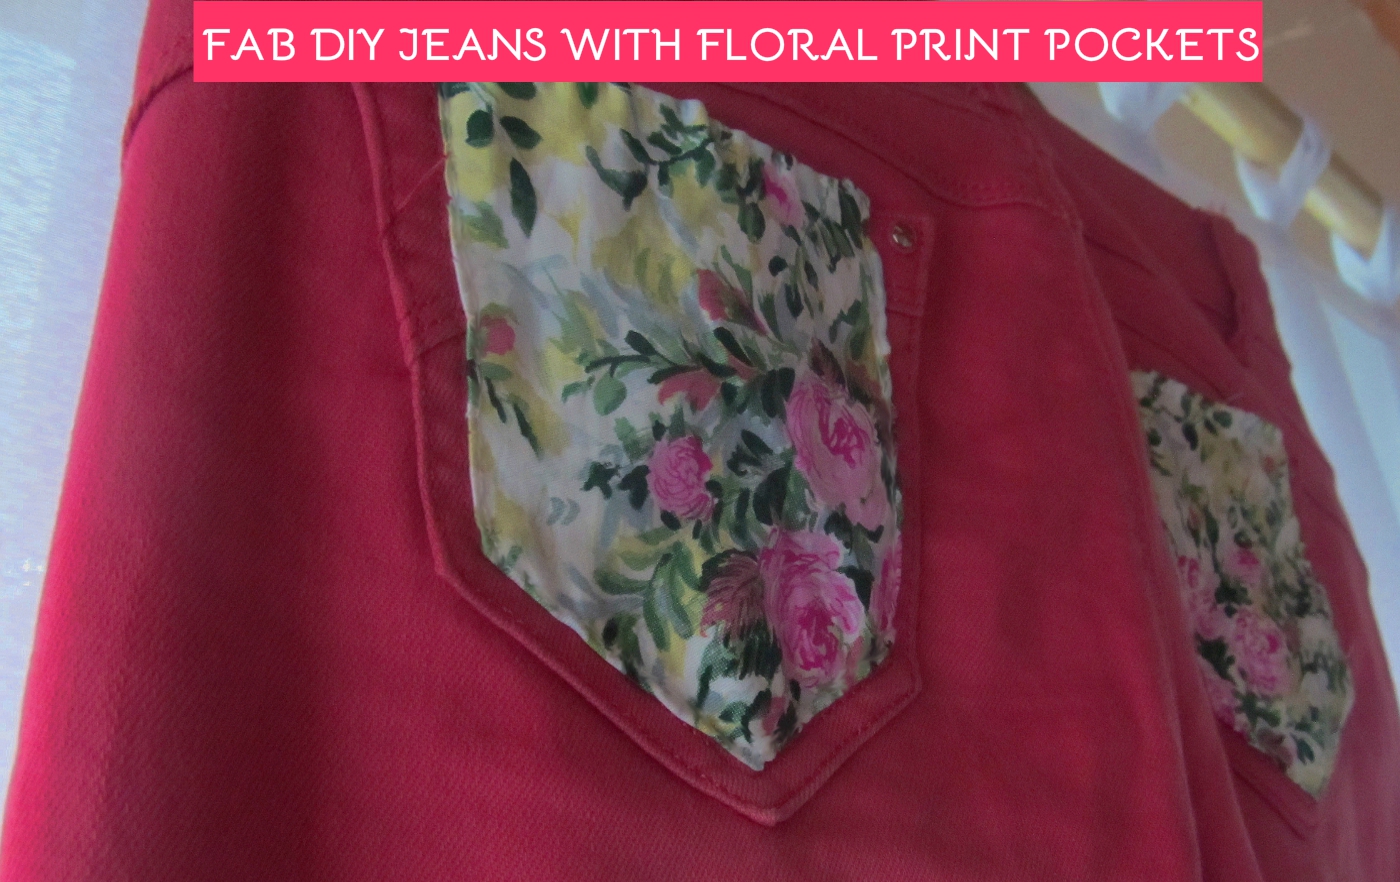 DIY Jeans With Floral Print Pockets